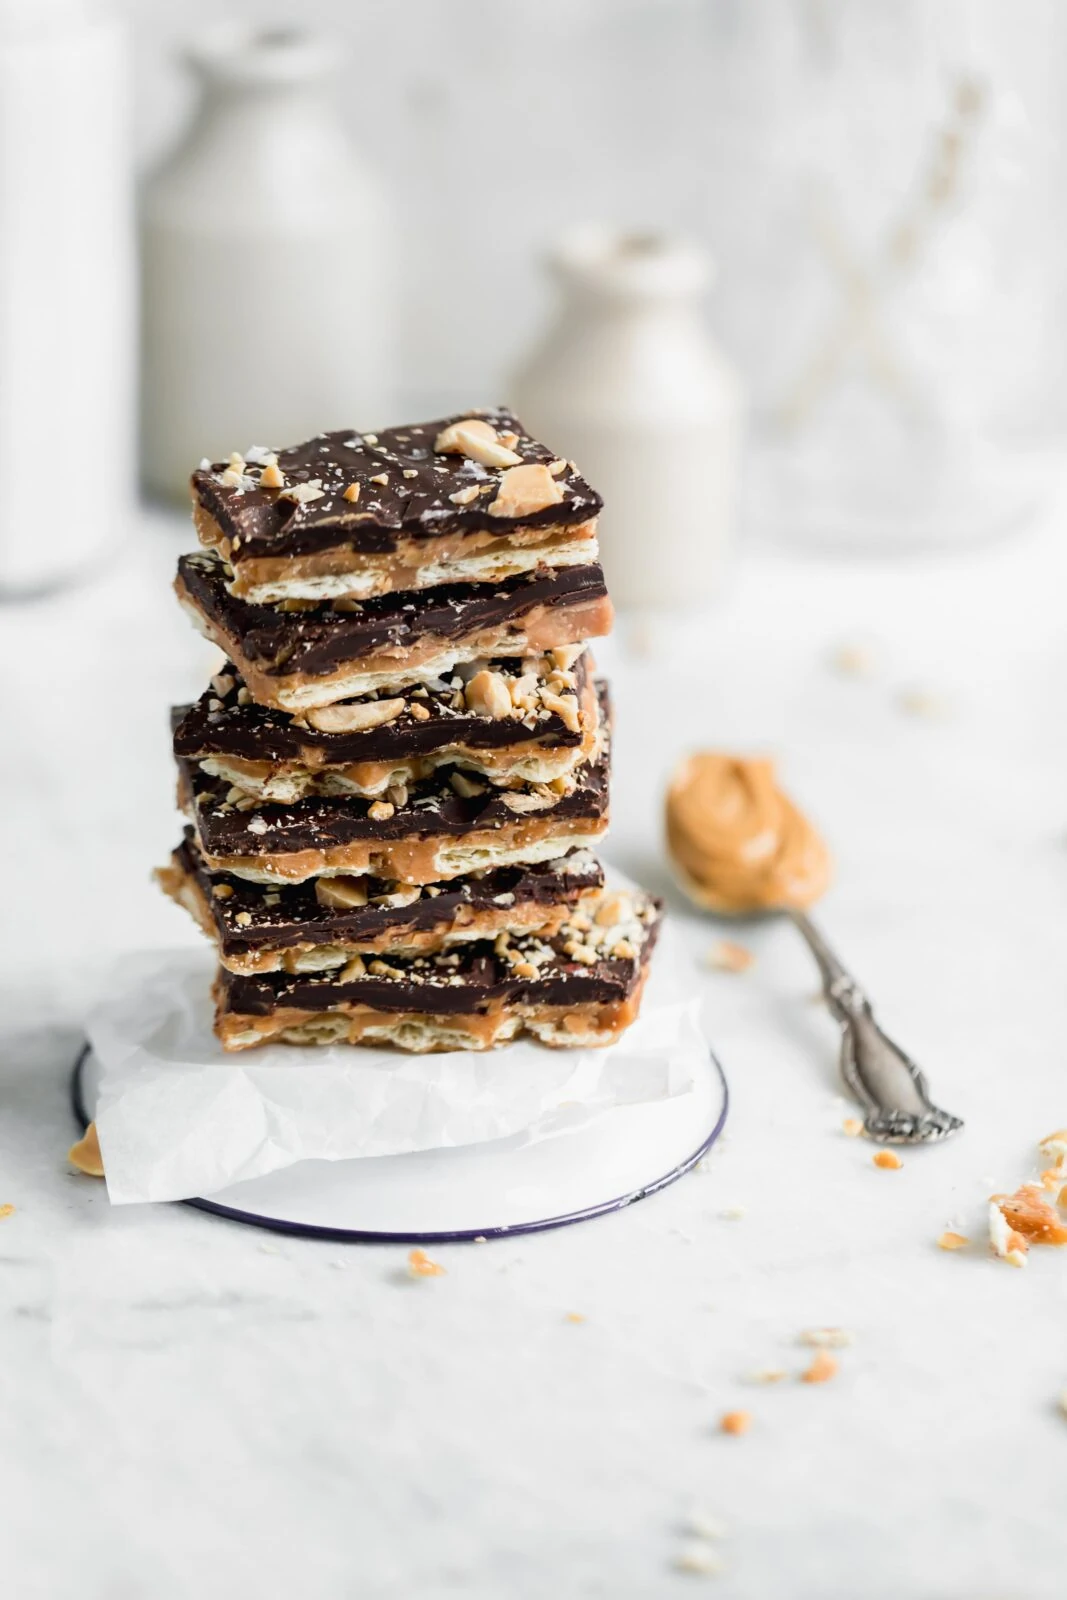 Stack of peanut butter saltine toffee bark. A crowd-pleasing sweet, salty, crunchy, and smooth Peanut Butter Toffee bark made entirely with ingredients you probably already have in your pantry! Hello, sweet thing!